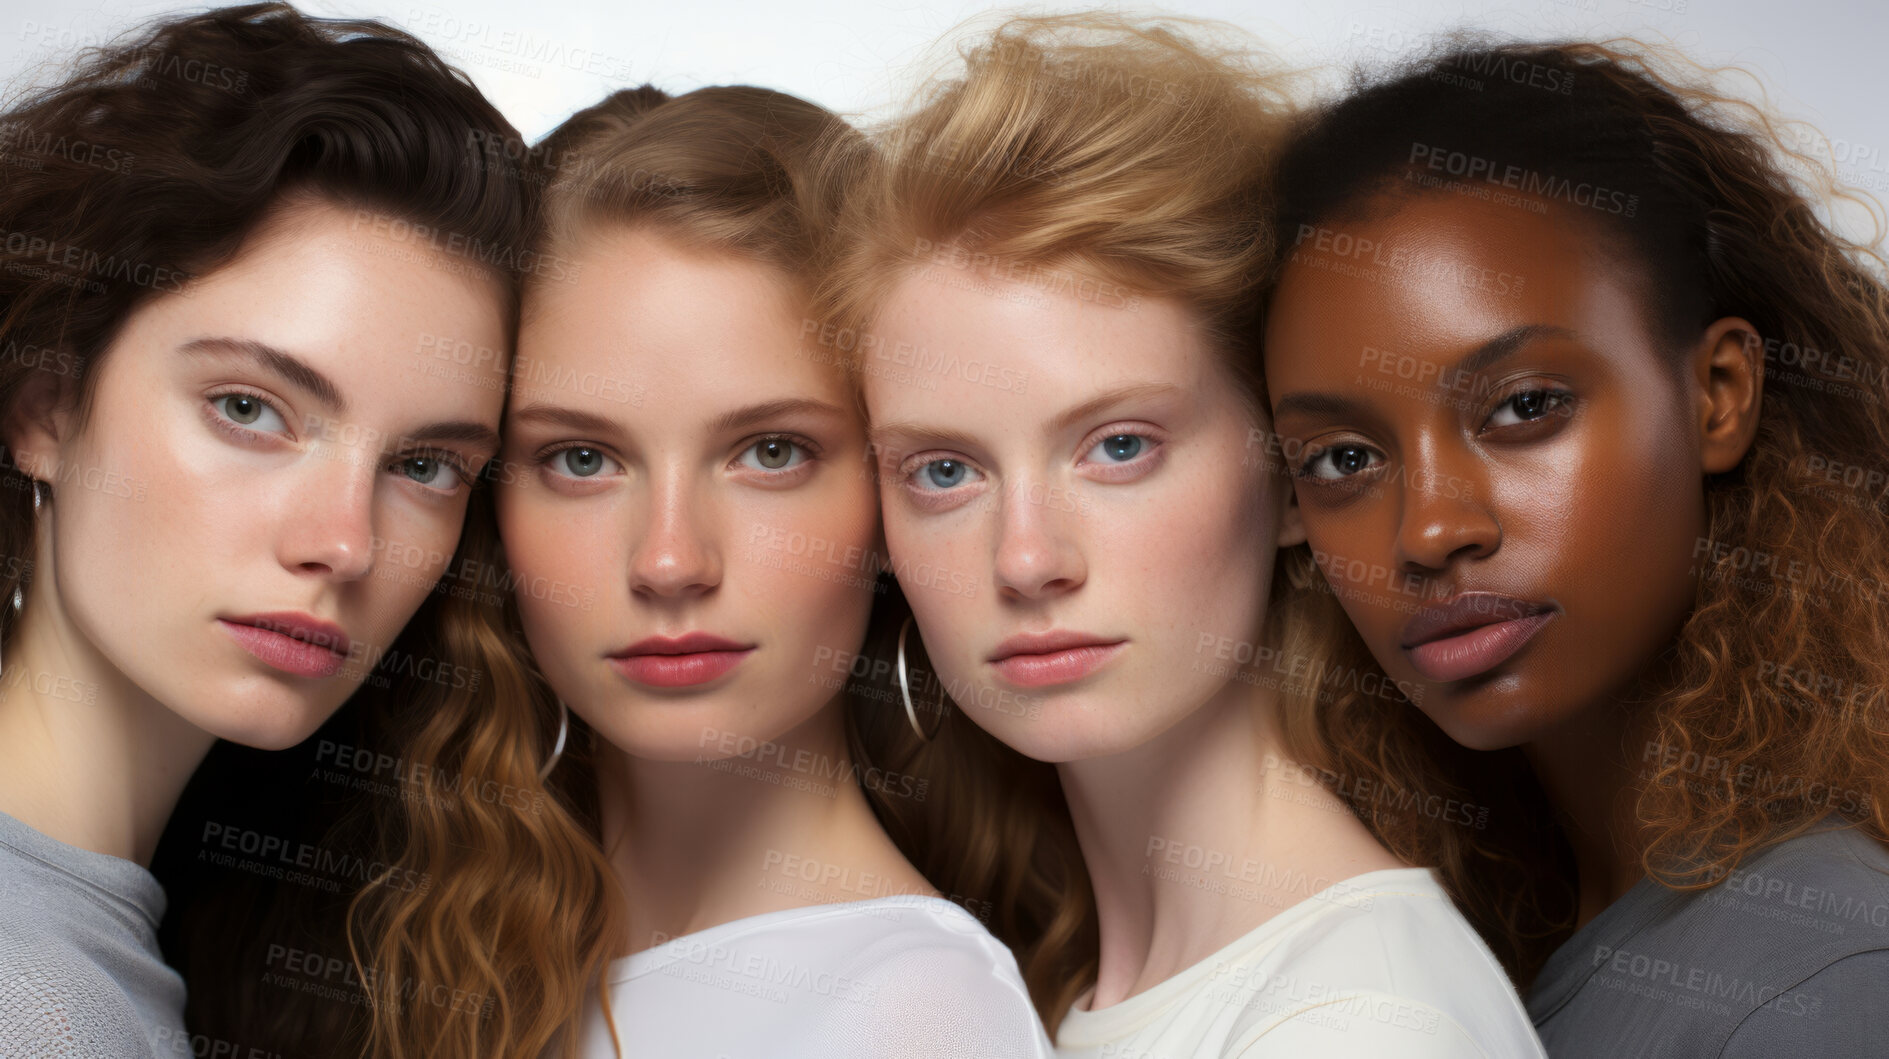 Buy stock photo Group of young mixed race models in studio shot. Beauty, fashion concept.